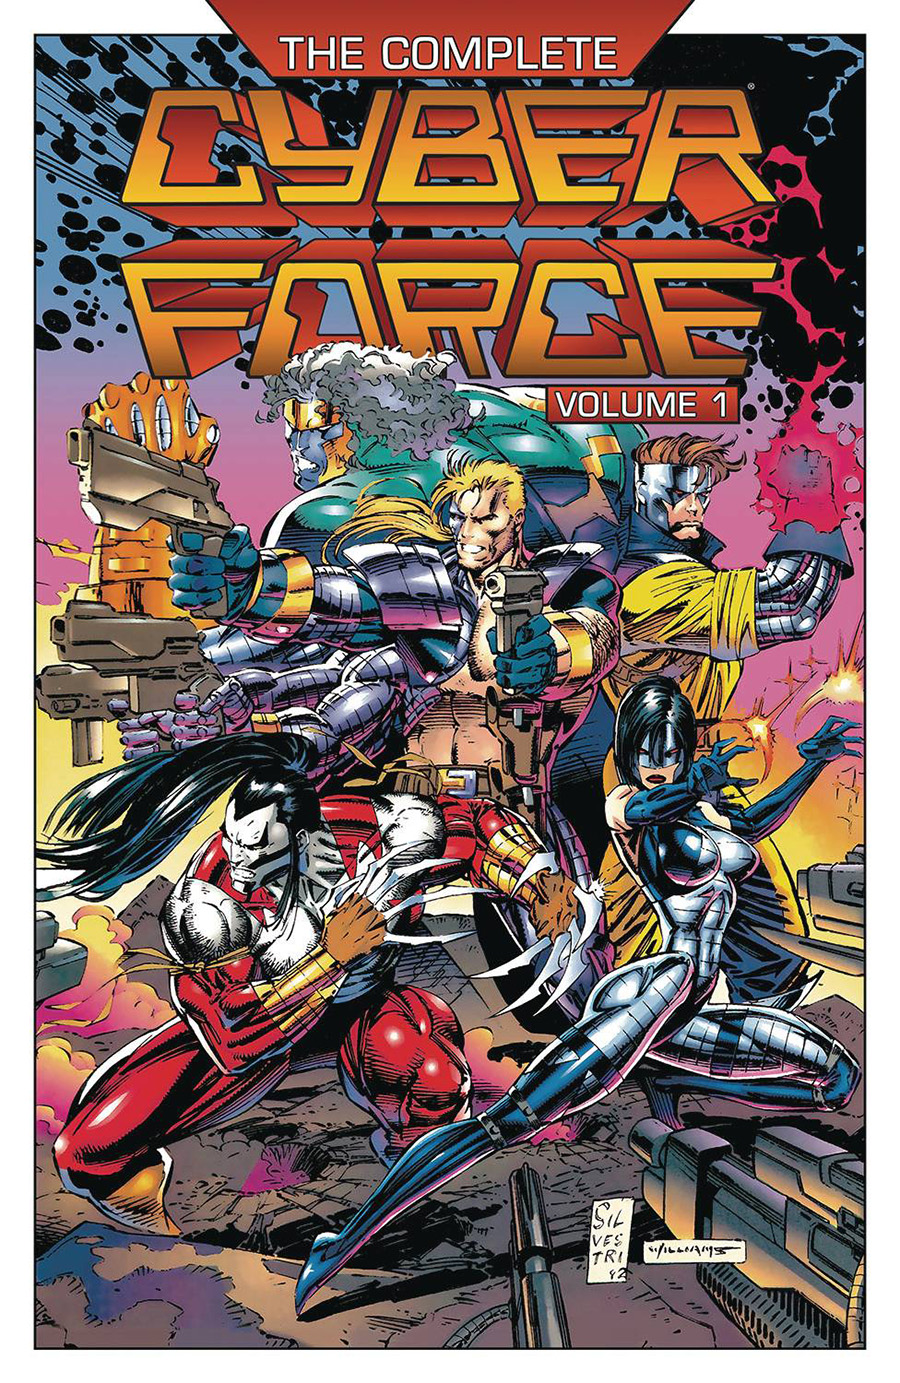 Complete Cyberforce Vol 1 TP